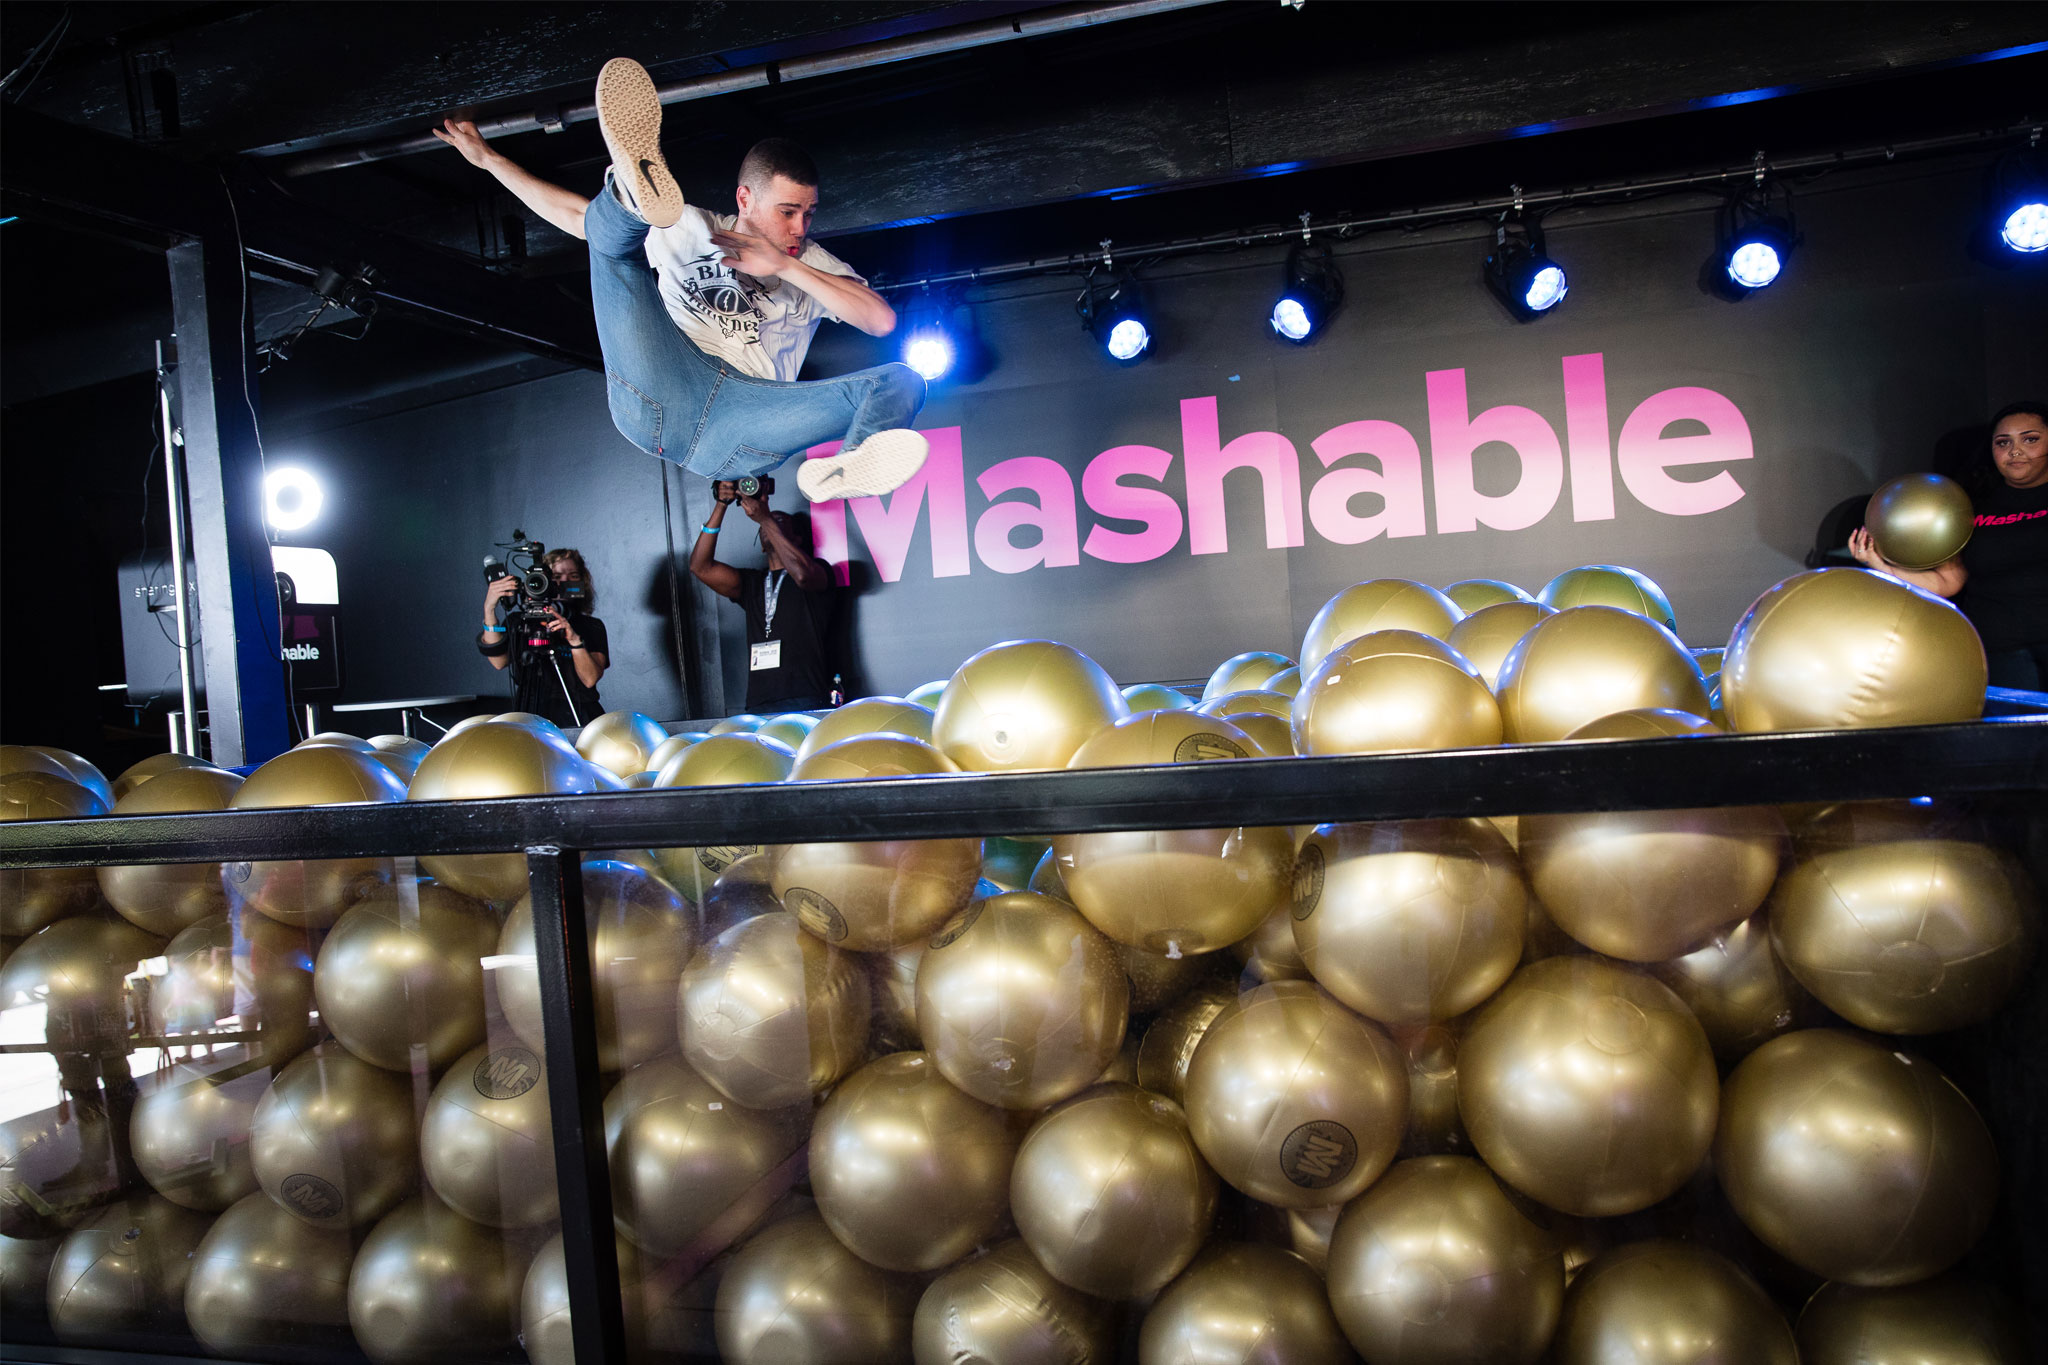 Picture of event goer jumping in custom made ball pit with Mashable sign in background.